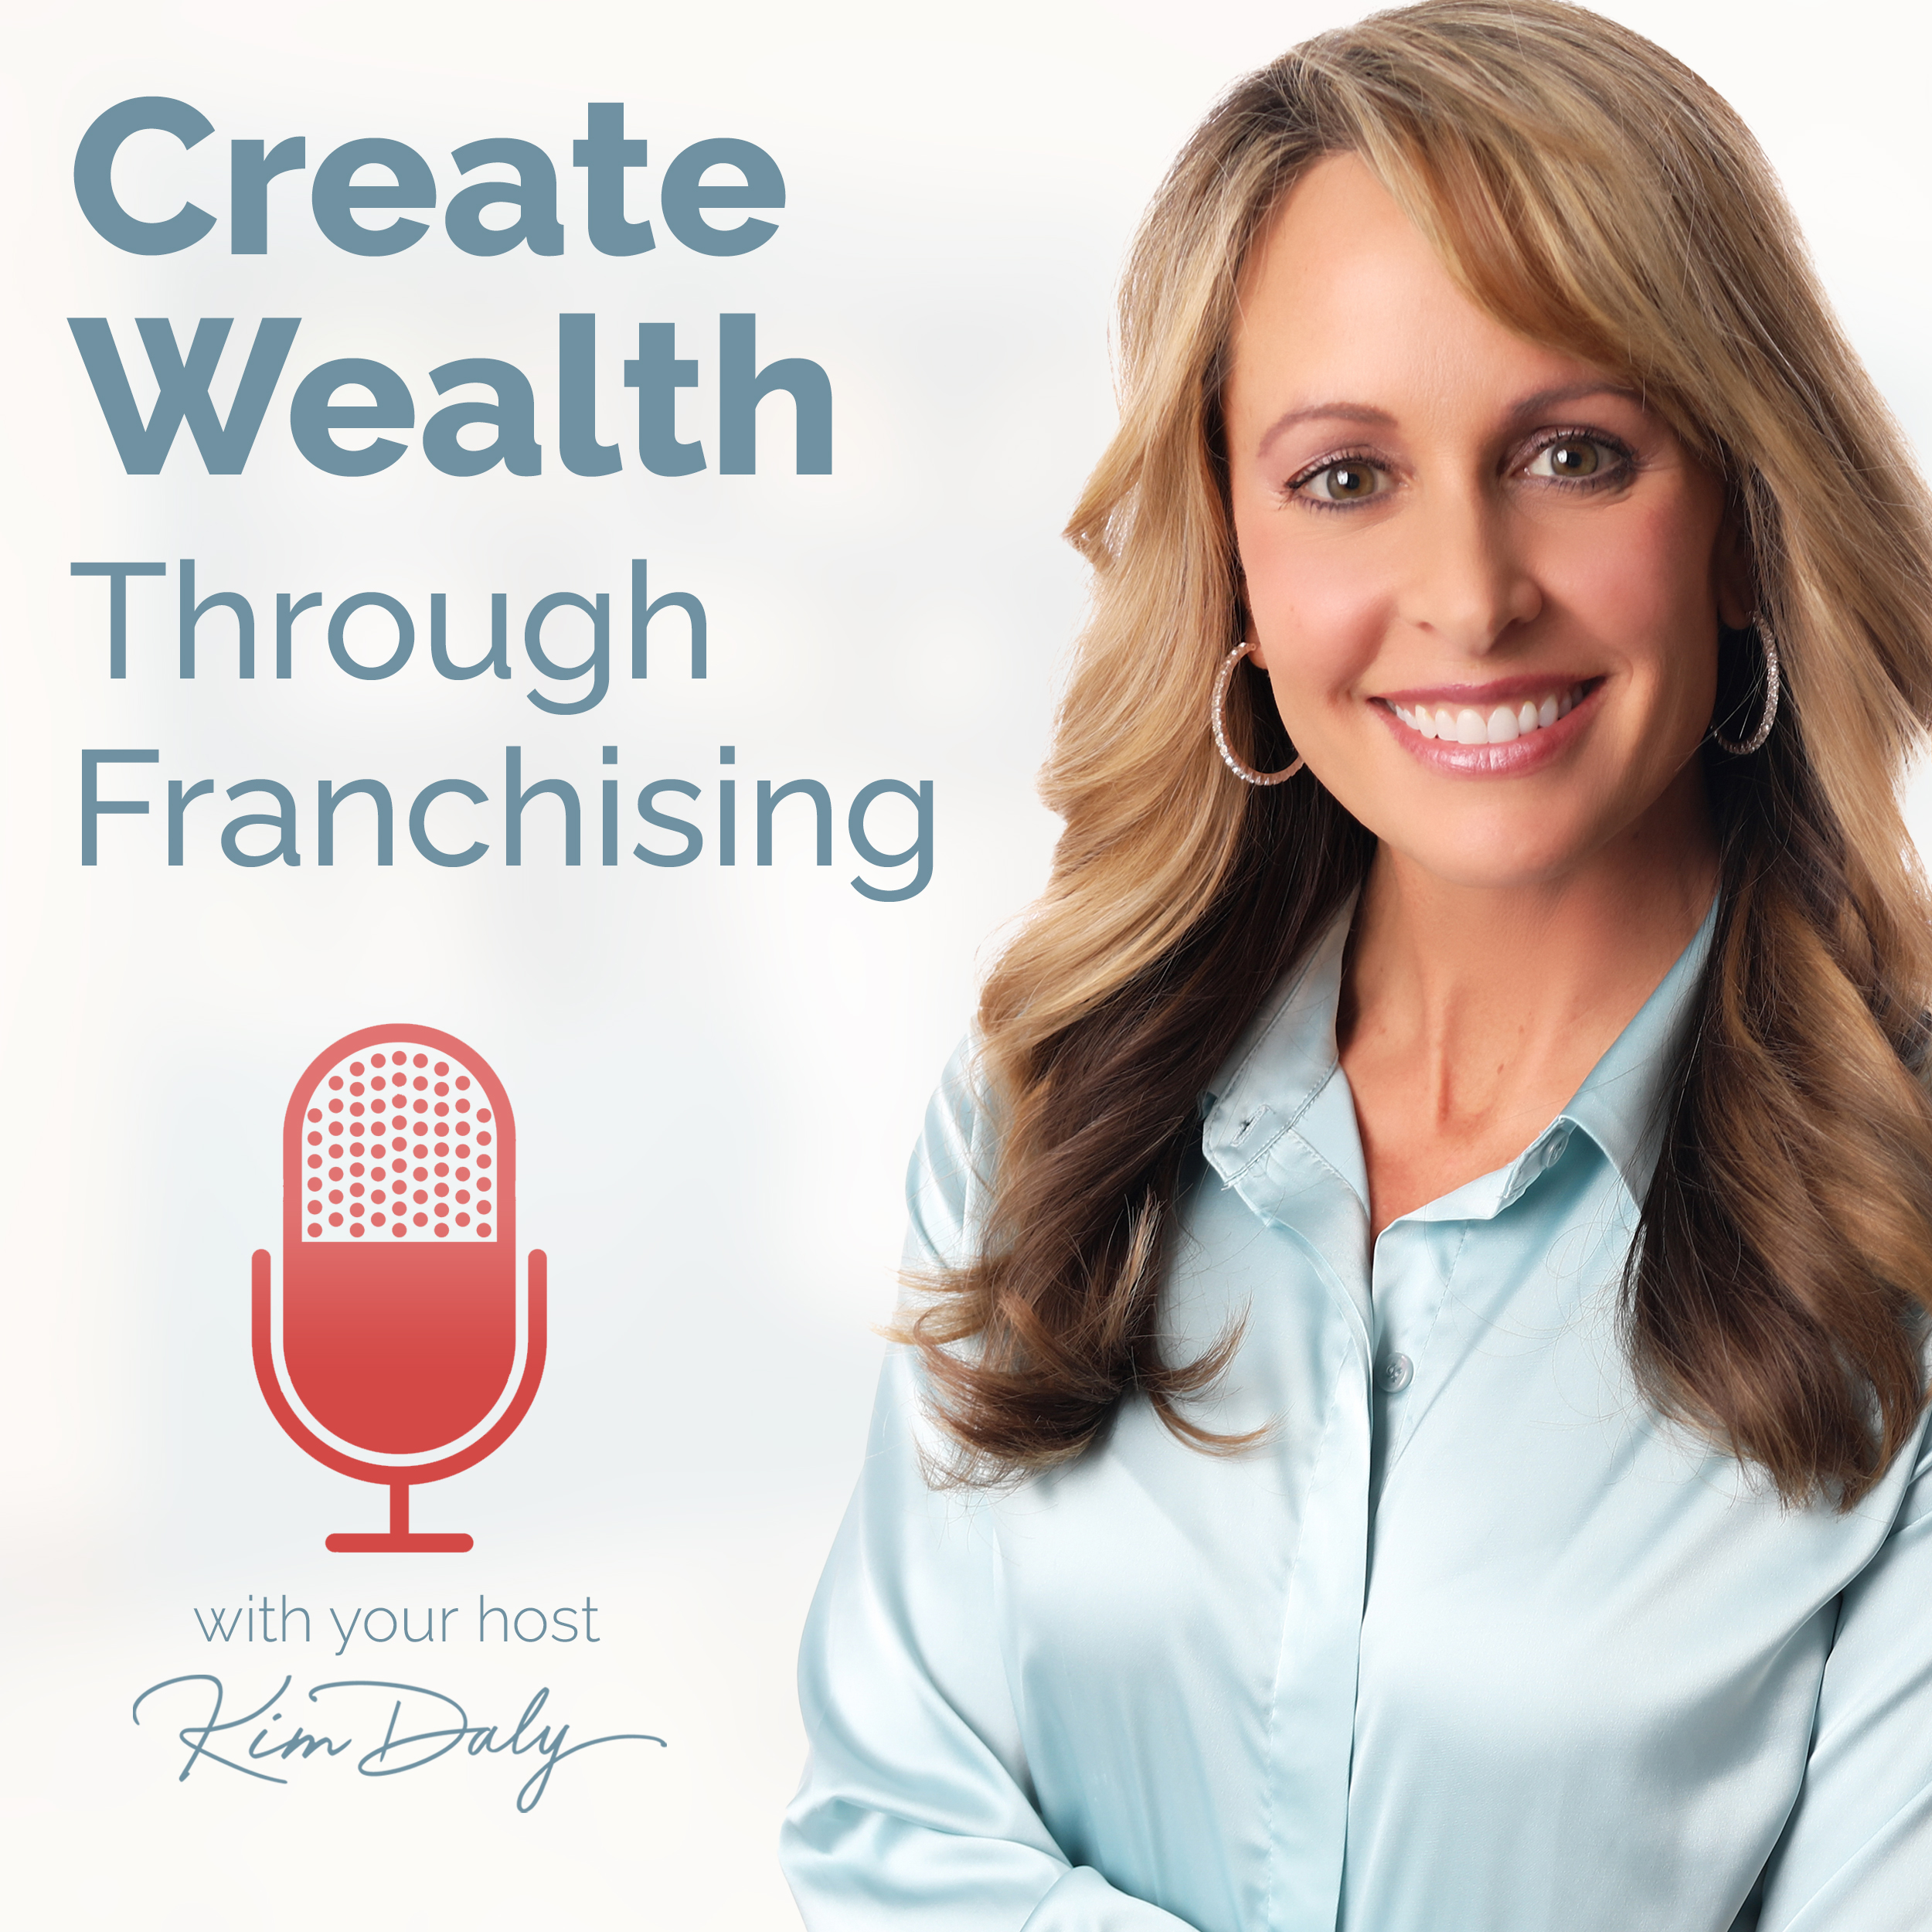 Top Franchisor Business Coach Shares Internal Strategies For Franchisee Success